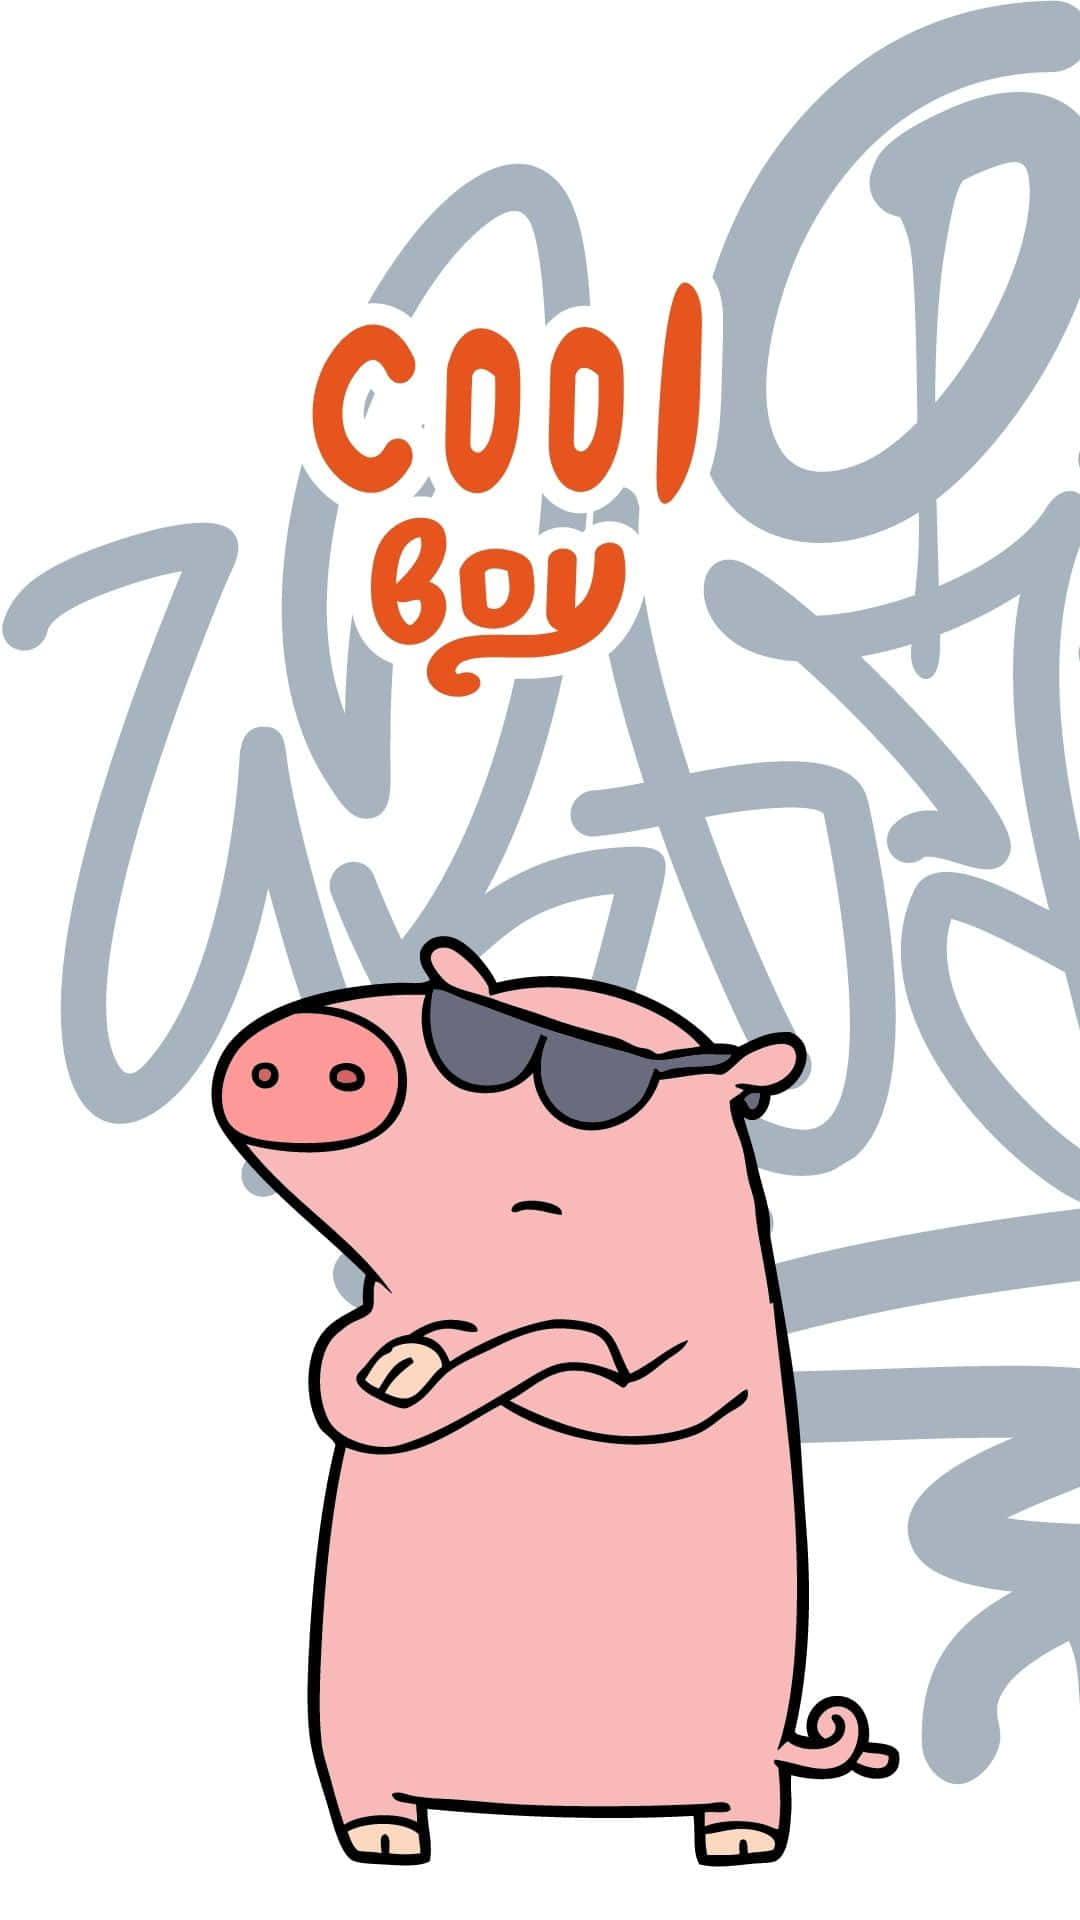 A Cartoon Pig With Sunglasses And Graffiti Background